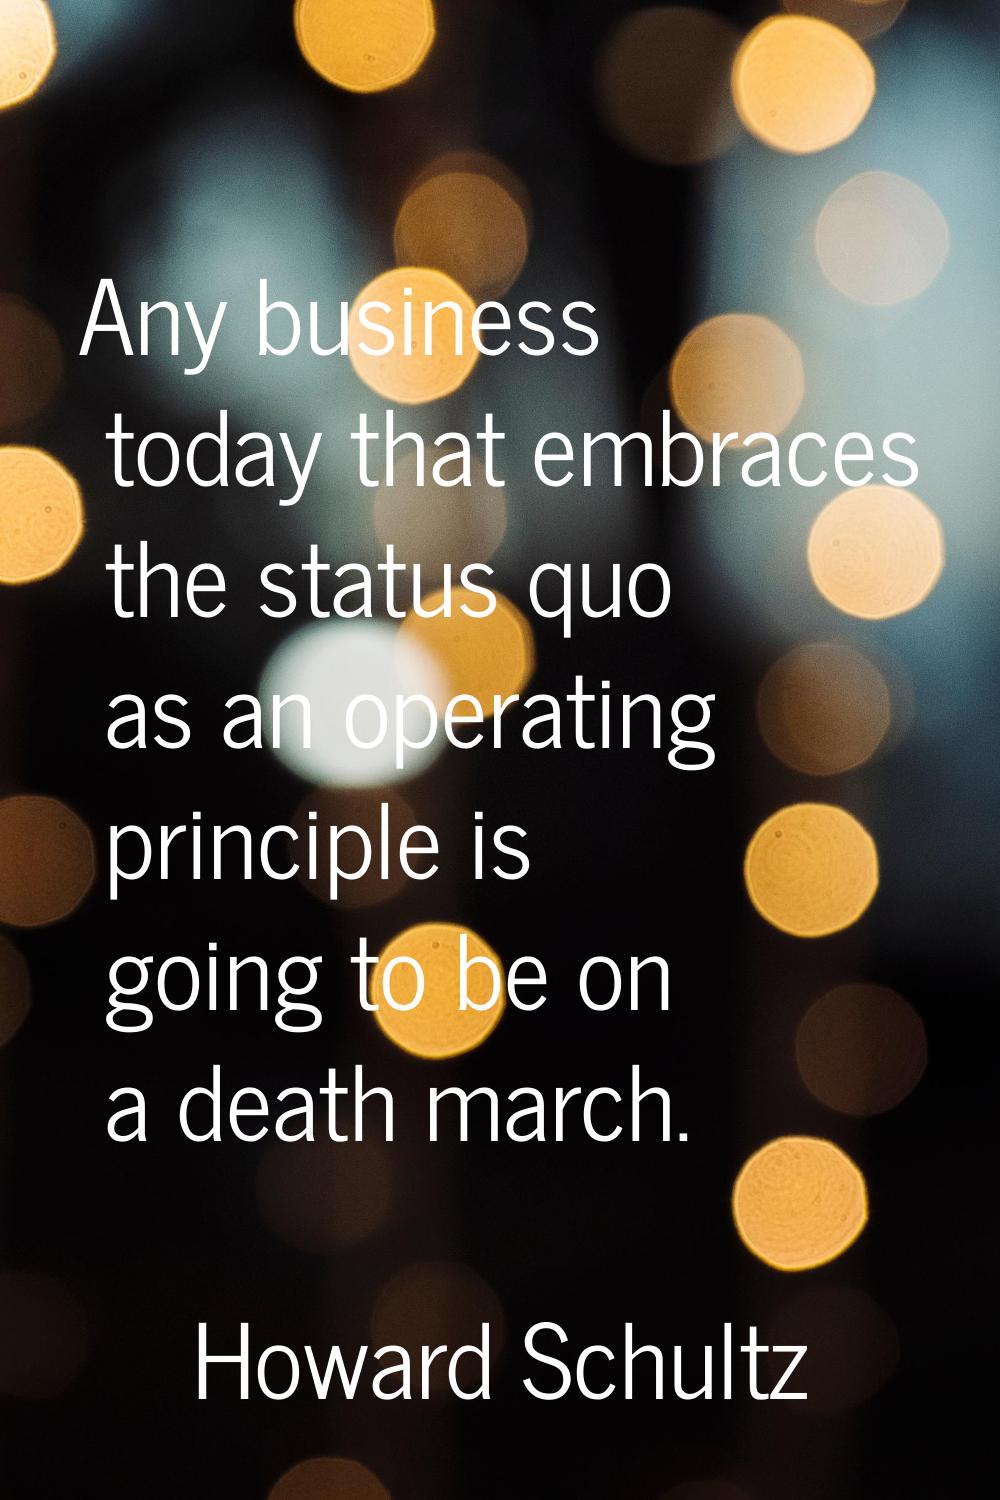 Any business today that embraces the status quo as an operating principle is going to be on a death